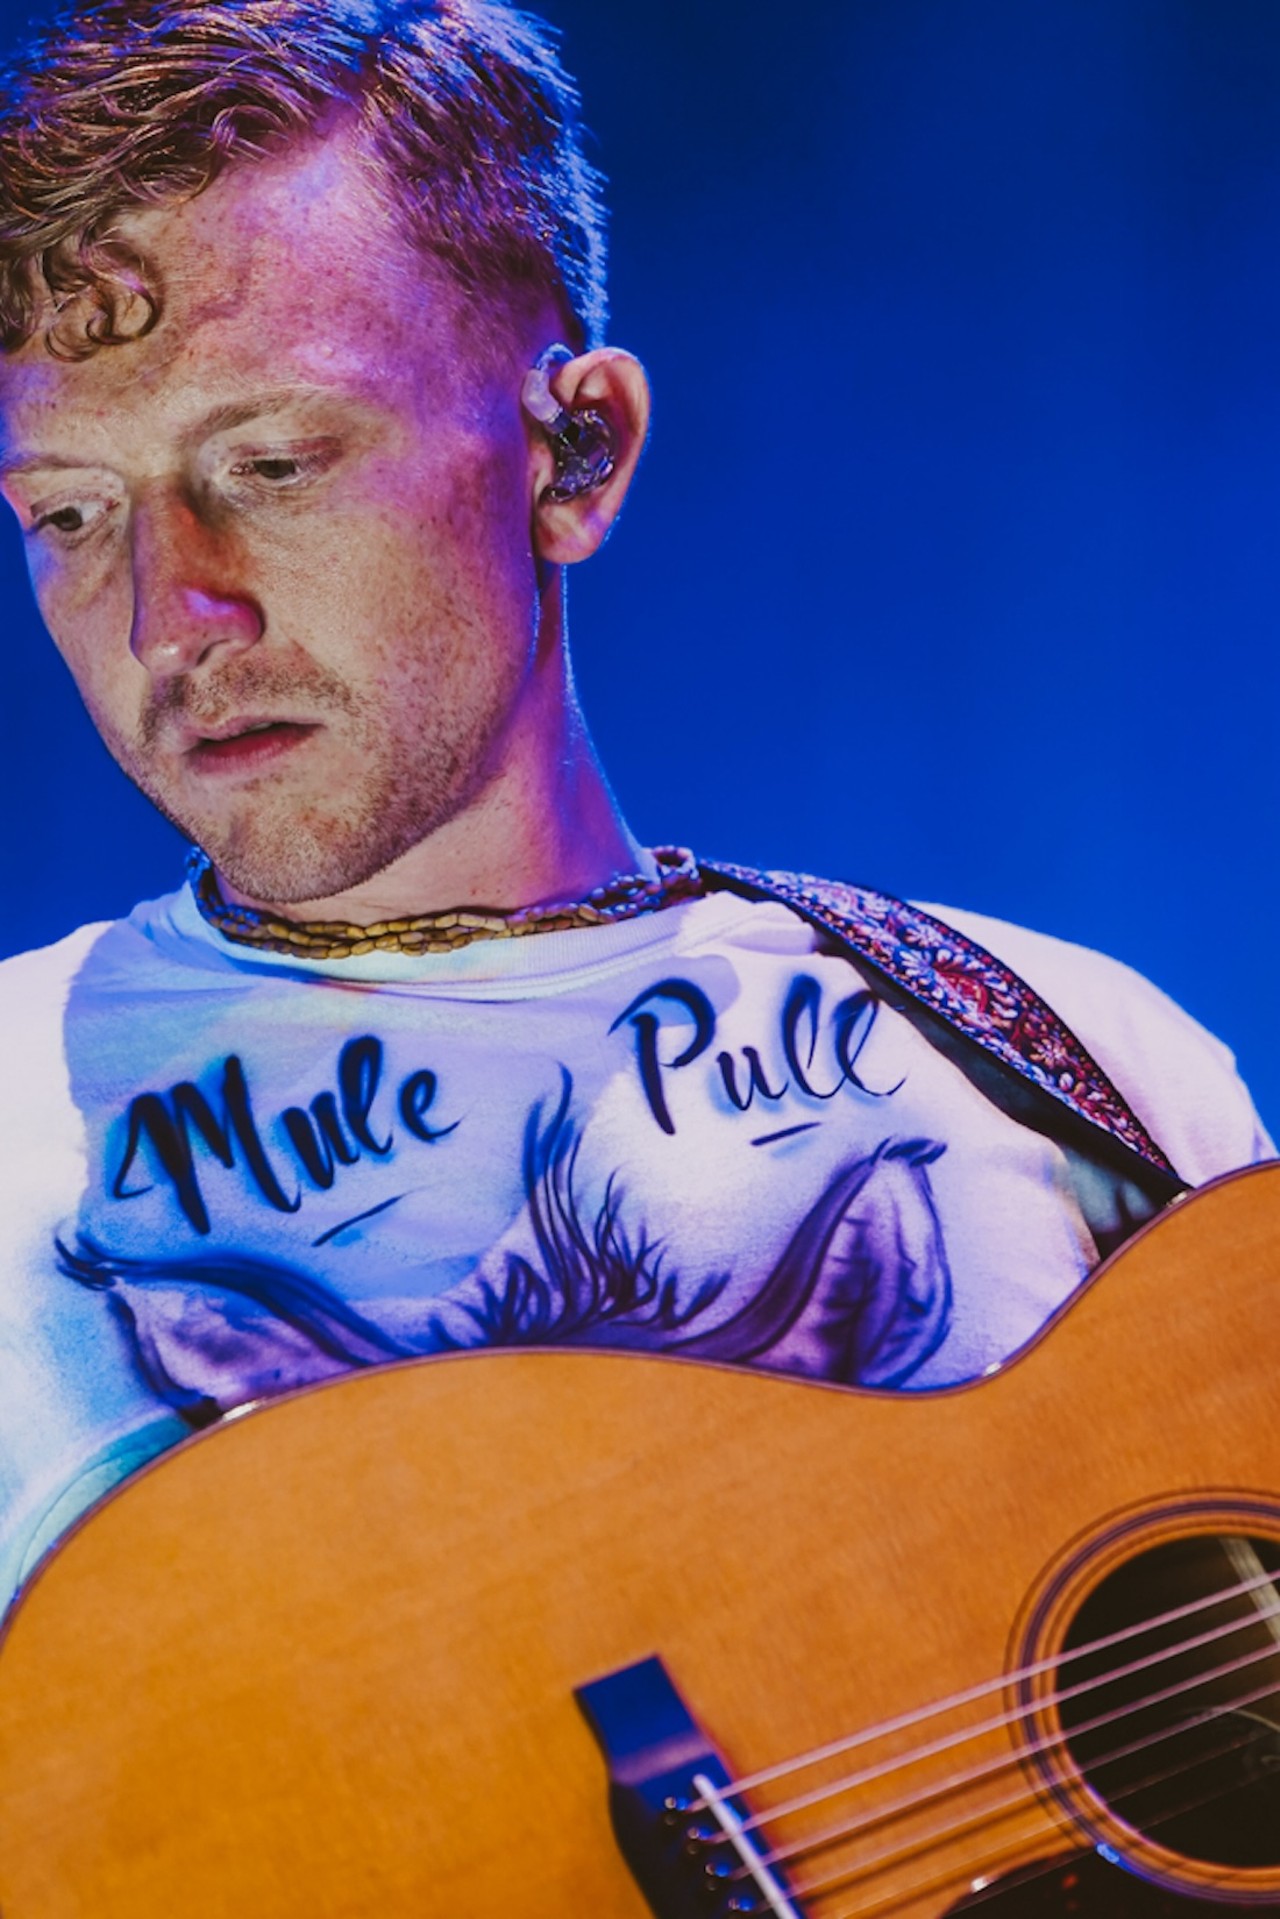 Review: In Tampa, Tyler Childers ditches tropes in showcasing country music’s brighter future [PHOTOS]